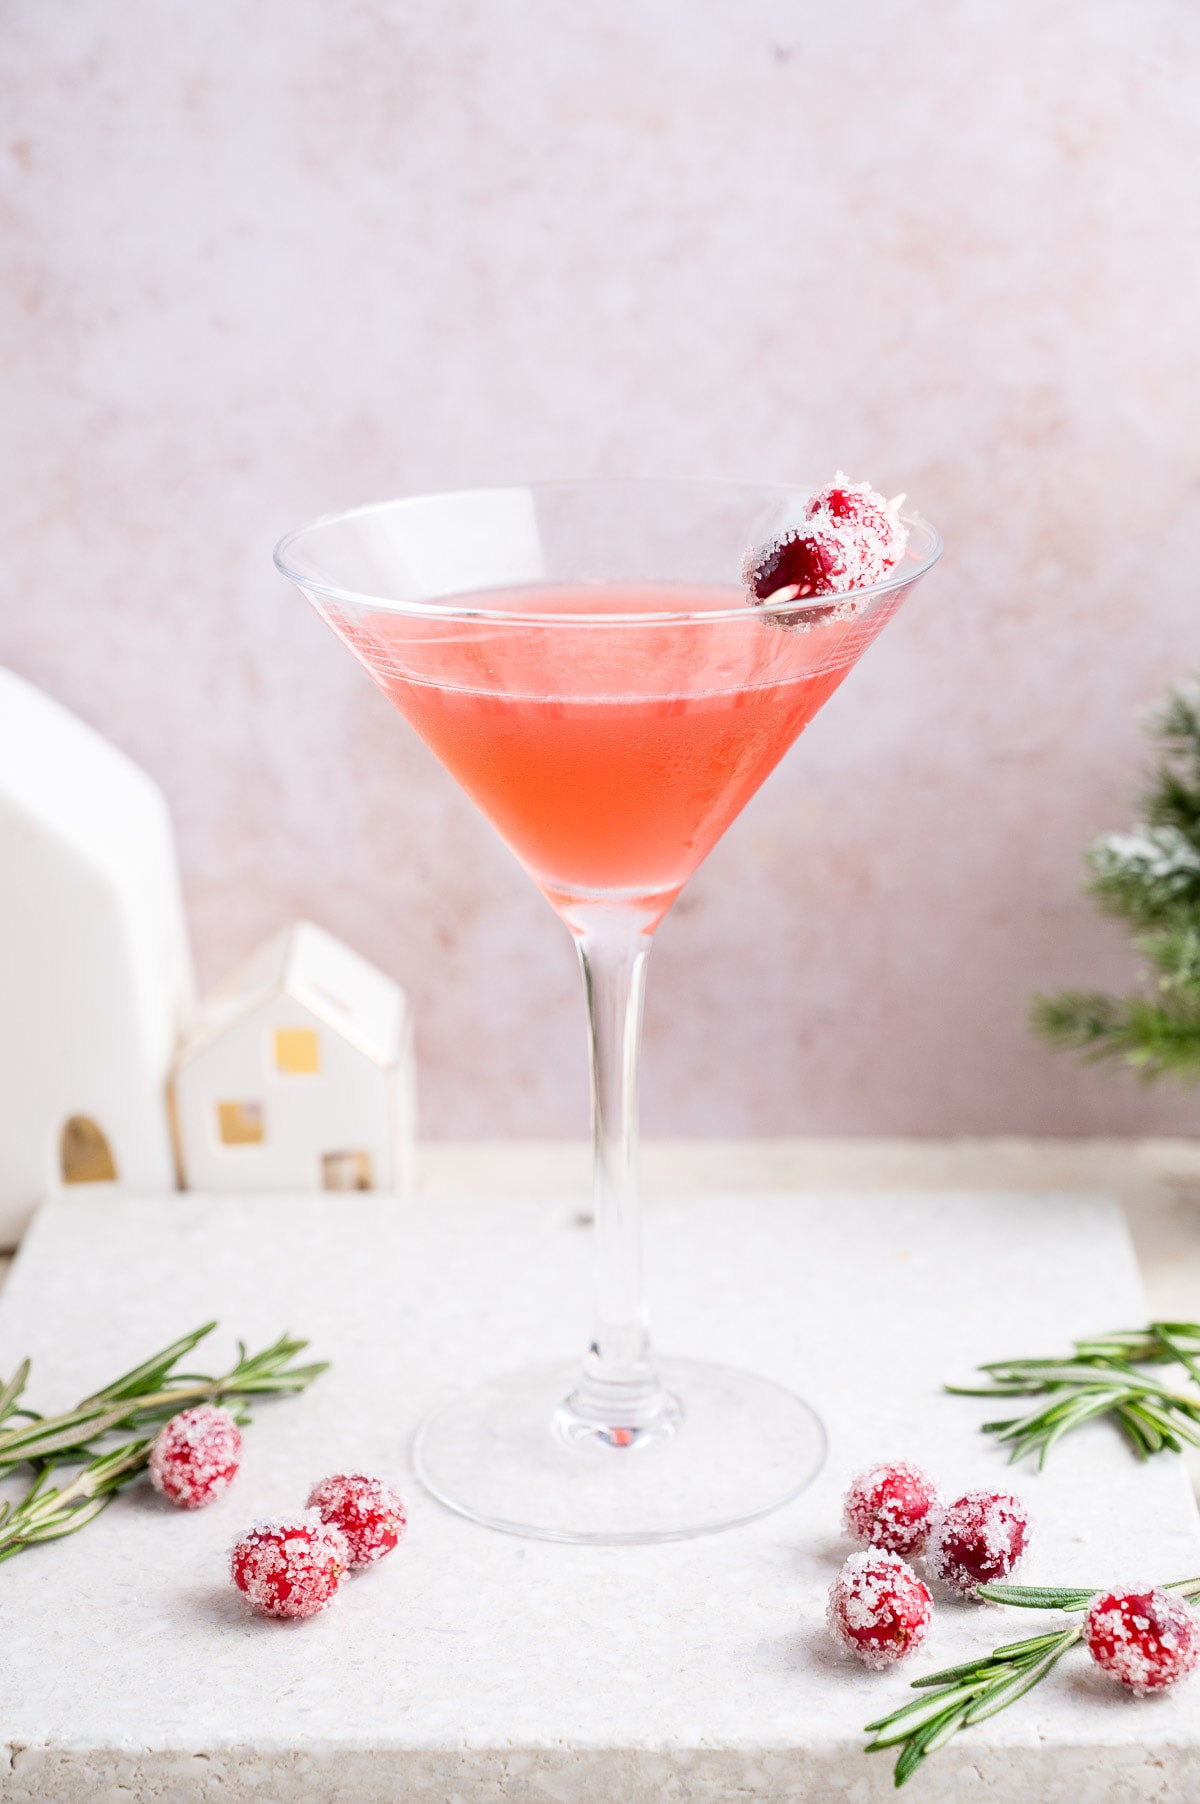 Cranberry martini in a martini glass decorated with sugared cranberries.